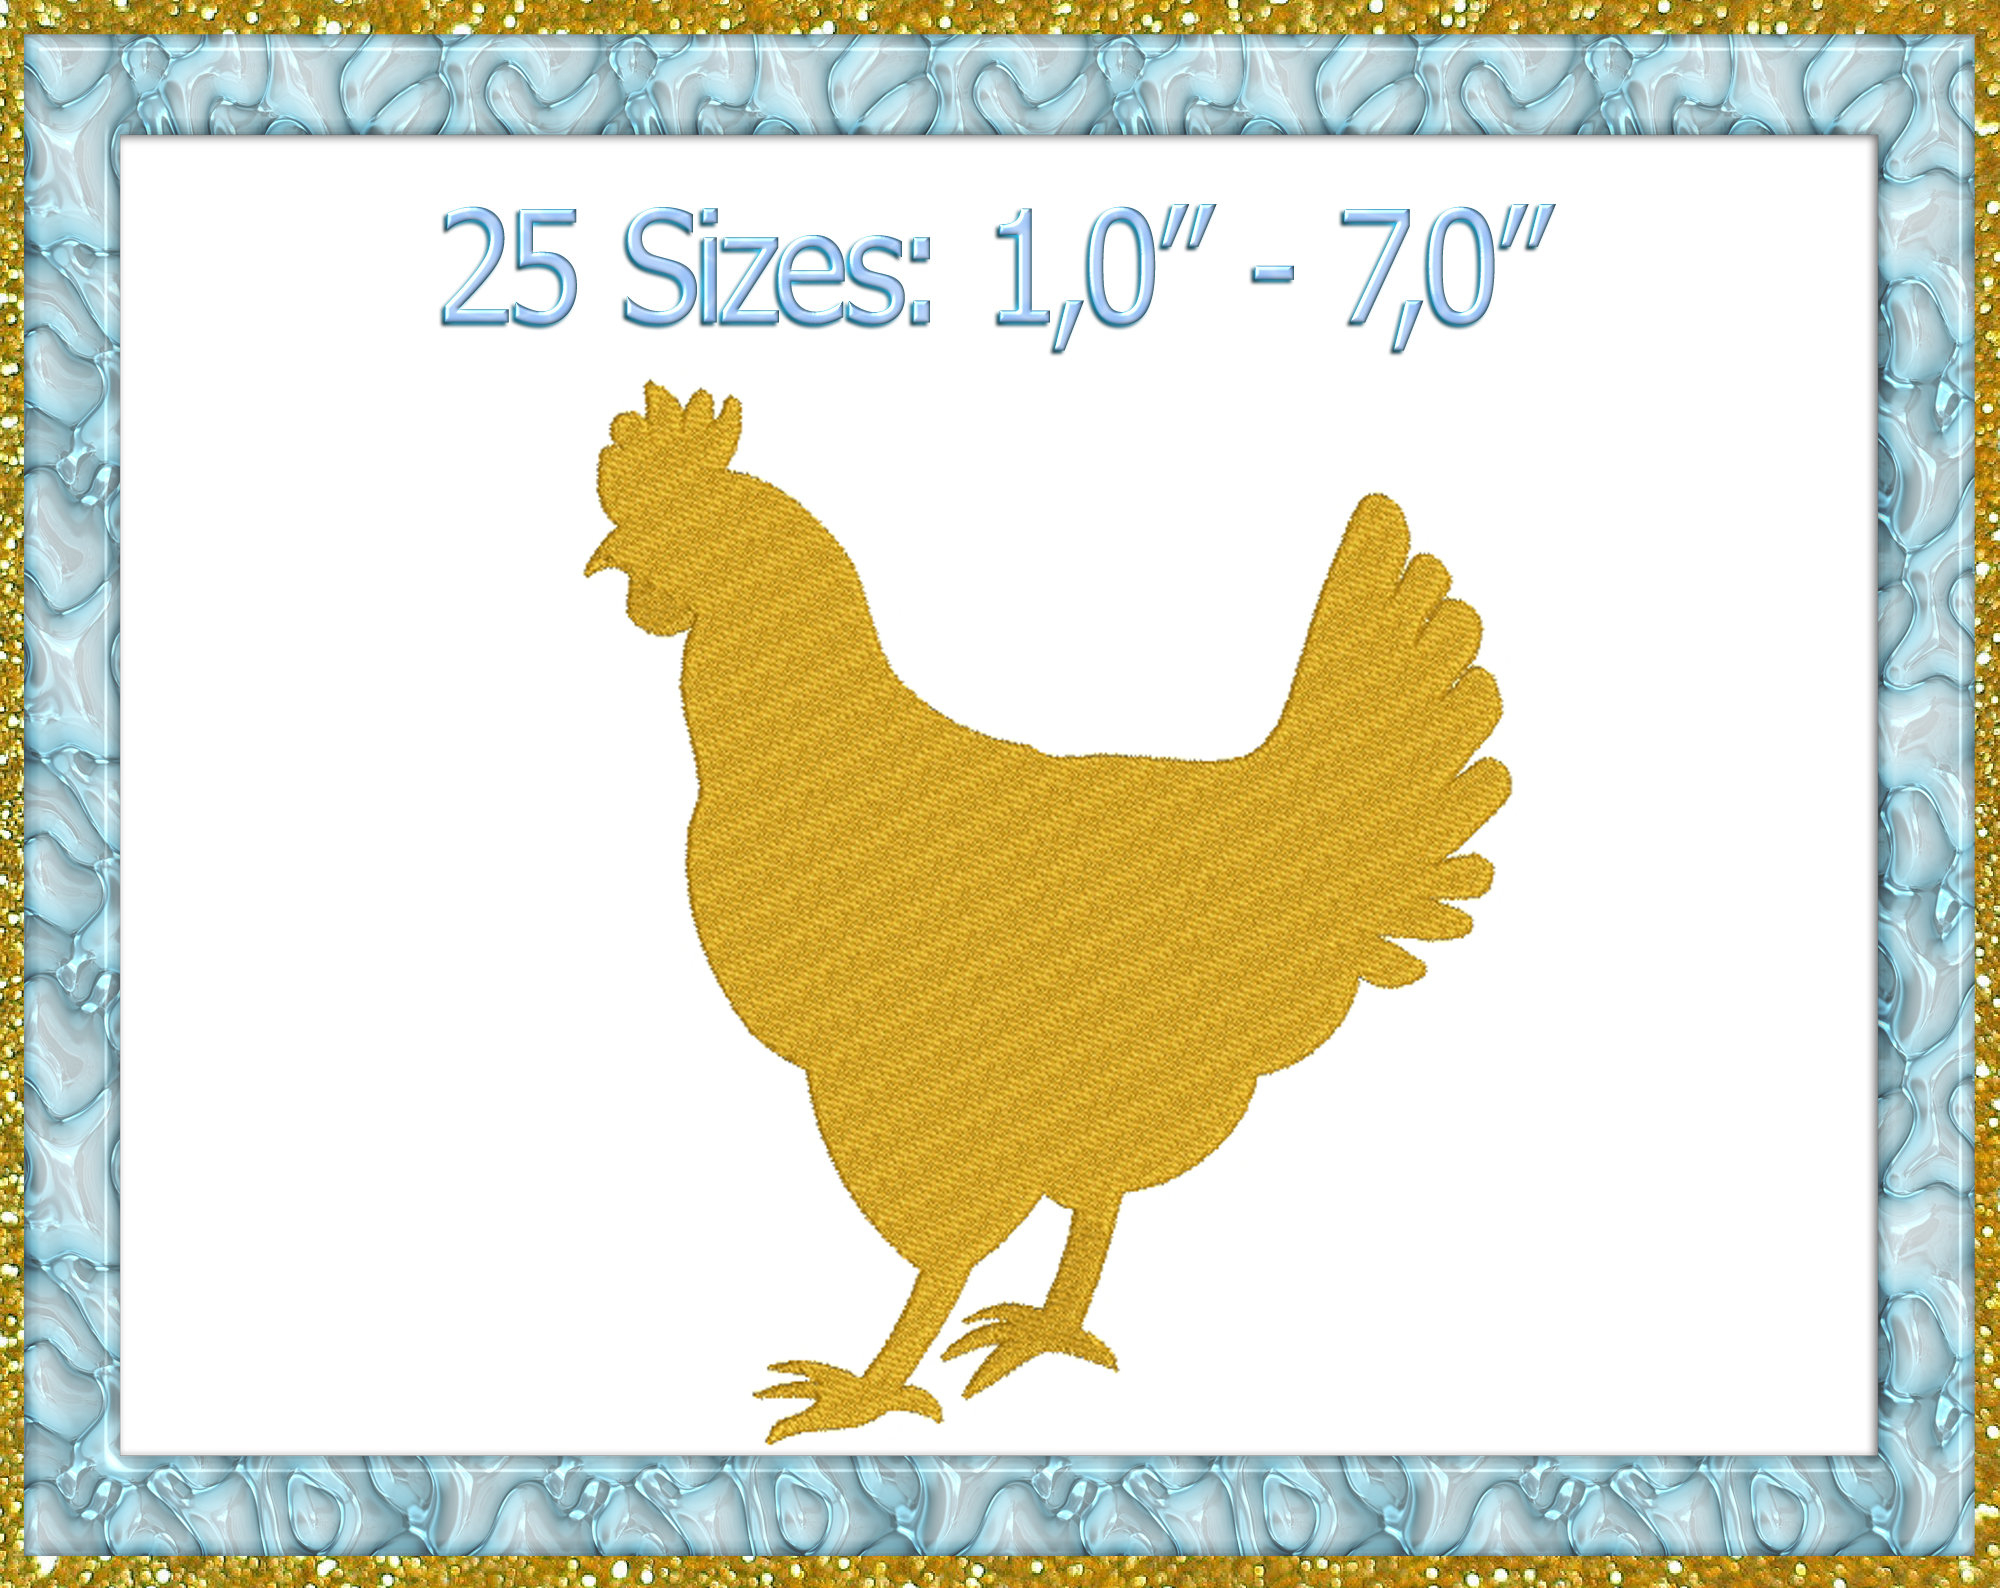 Chicken Embroidery Patterns Free Hen Embroidery Design Mini Hen Silhouette Tiny Hen Pattern Hen Embroidery Design Farm Embroidery Chicken Embroidery Mini Chicken Silhouette